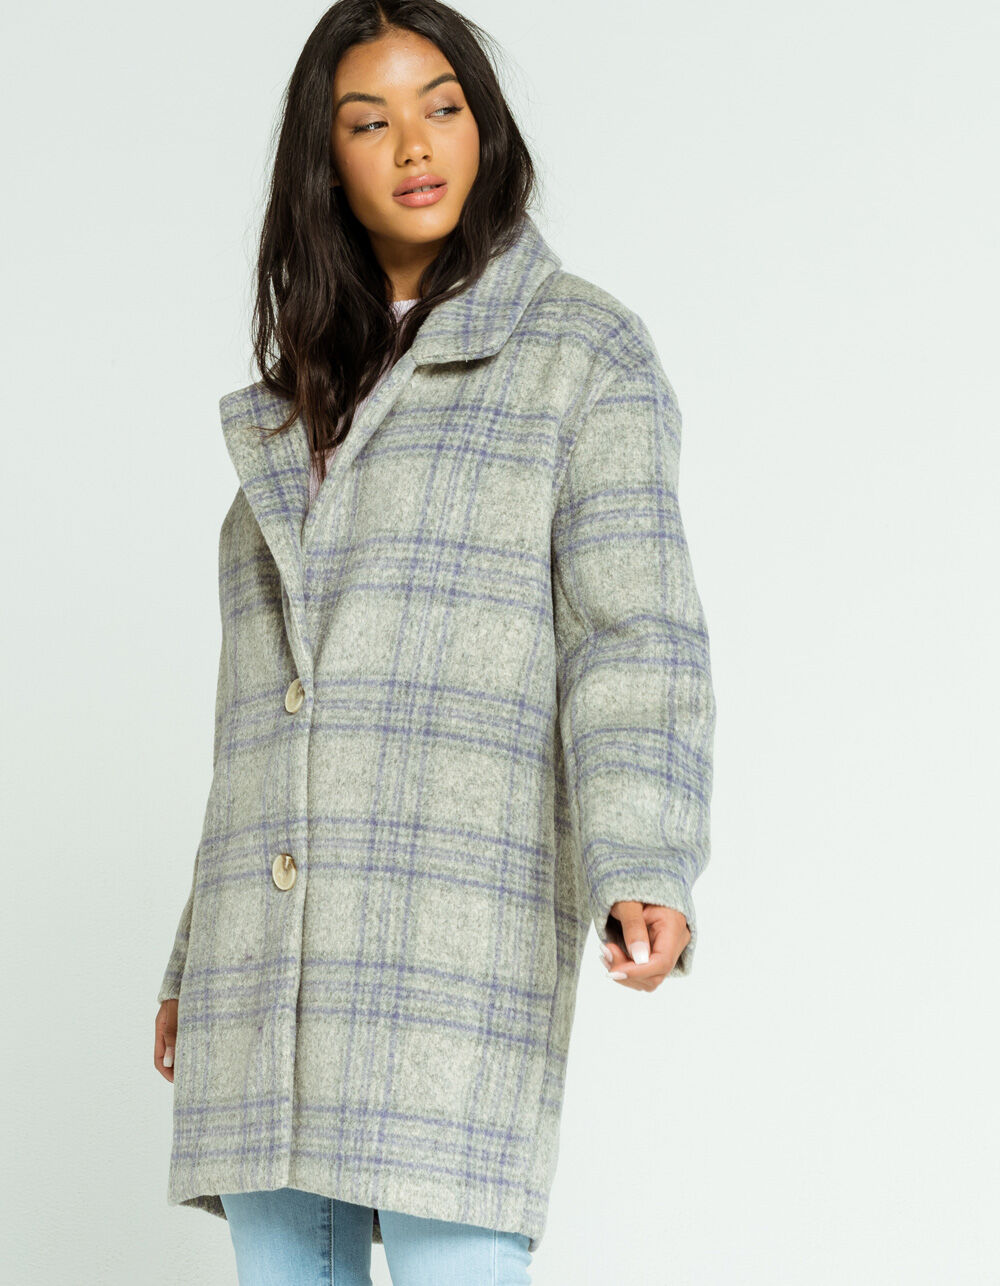 KNOW ONE CARES Plaid Womens Coat - GRAY/LAVENDER | Tillys